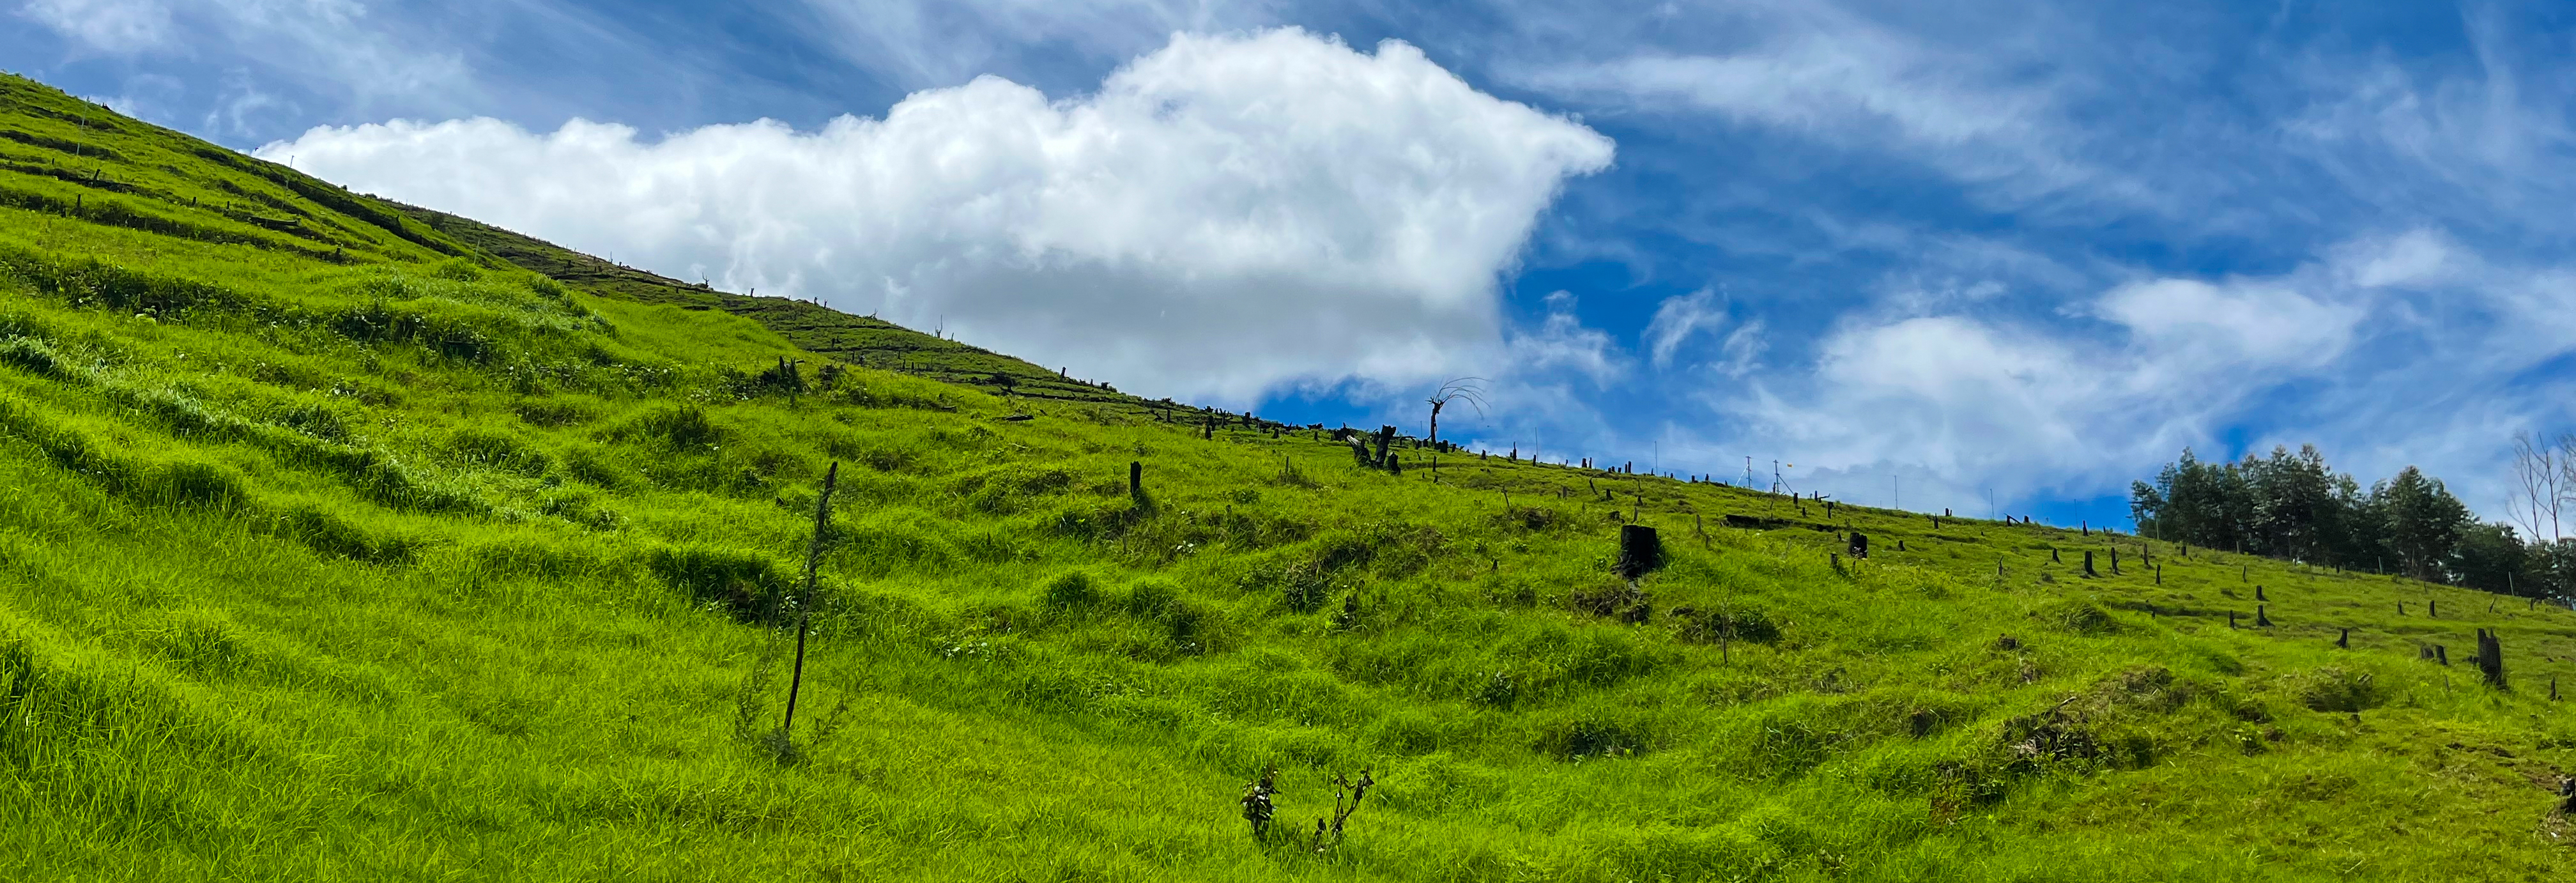 Shola grassland ecosystems are found in high-altitude mountain ranges of the Western Ghats in India above 1,000 meters 